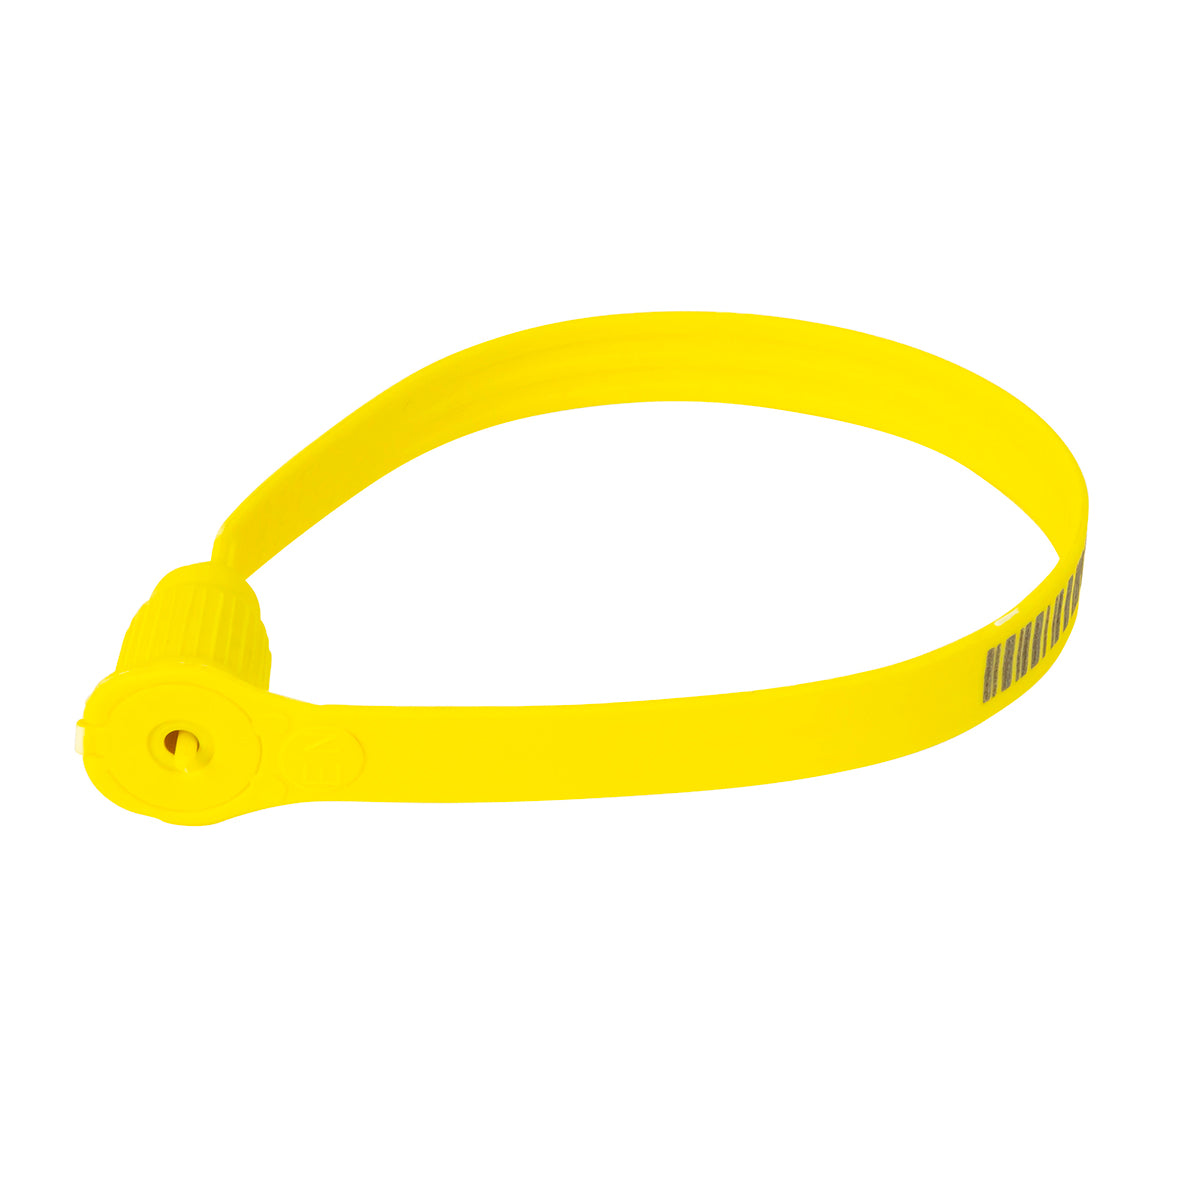 VersaCheck - Fixed Length Plastic Security Seal (Yellow)